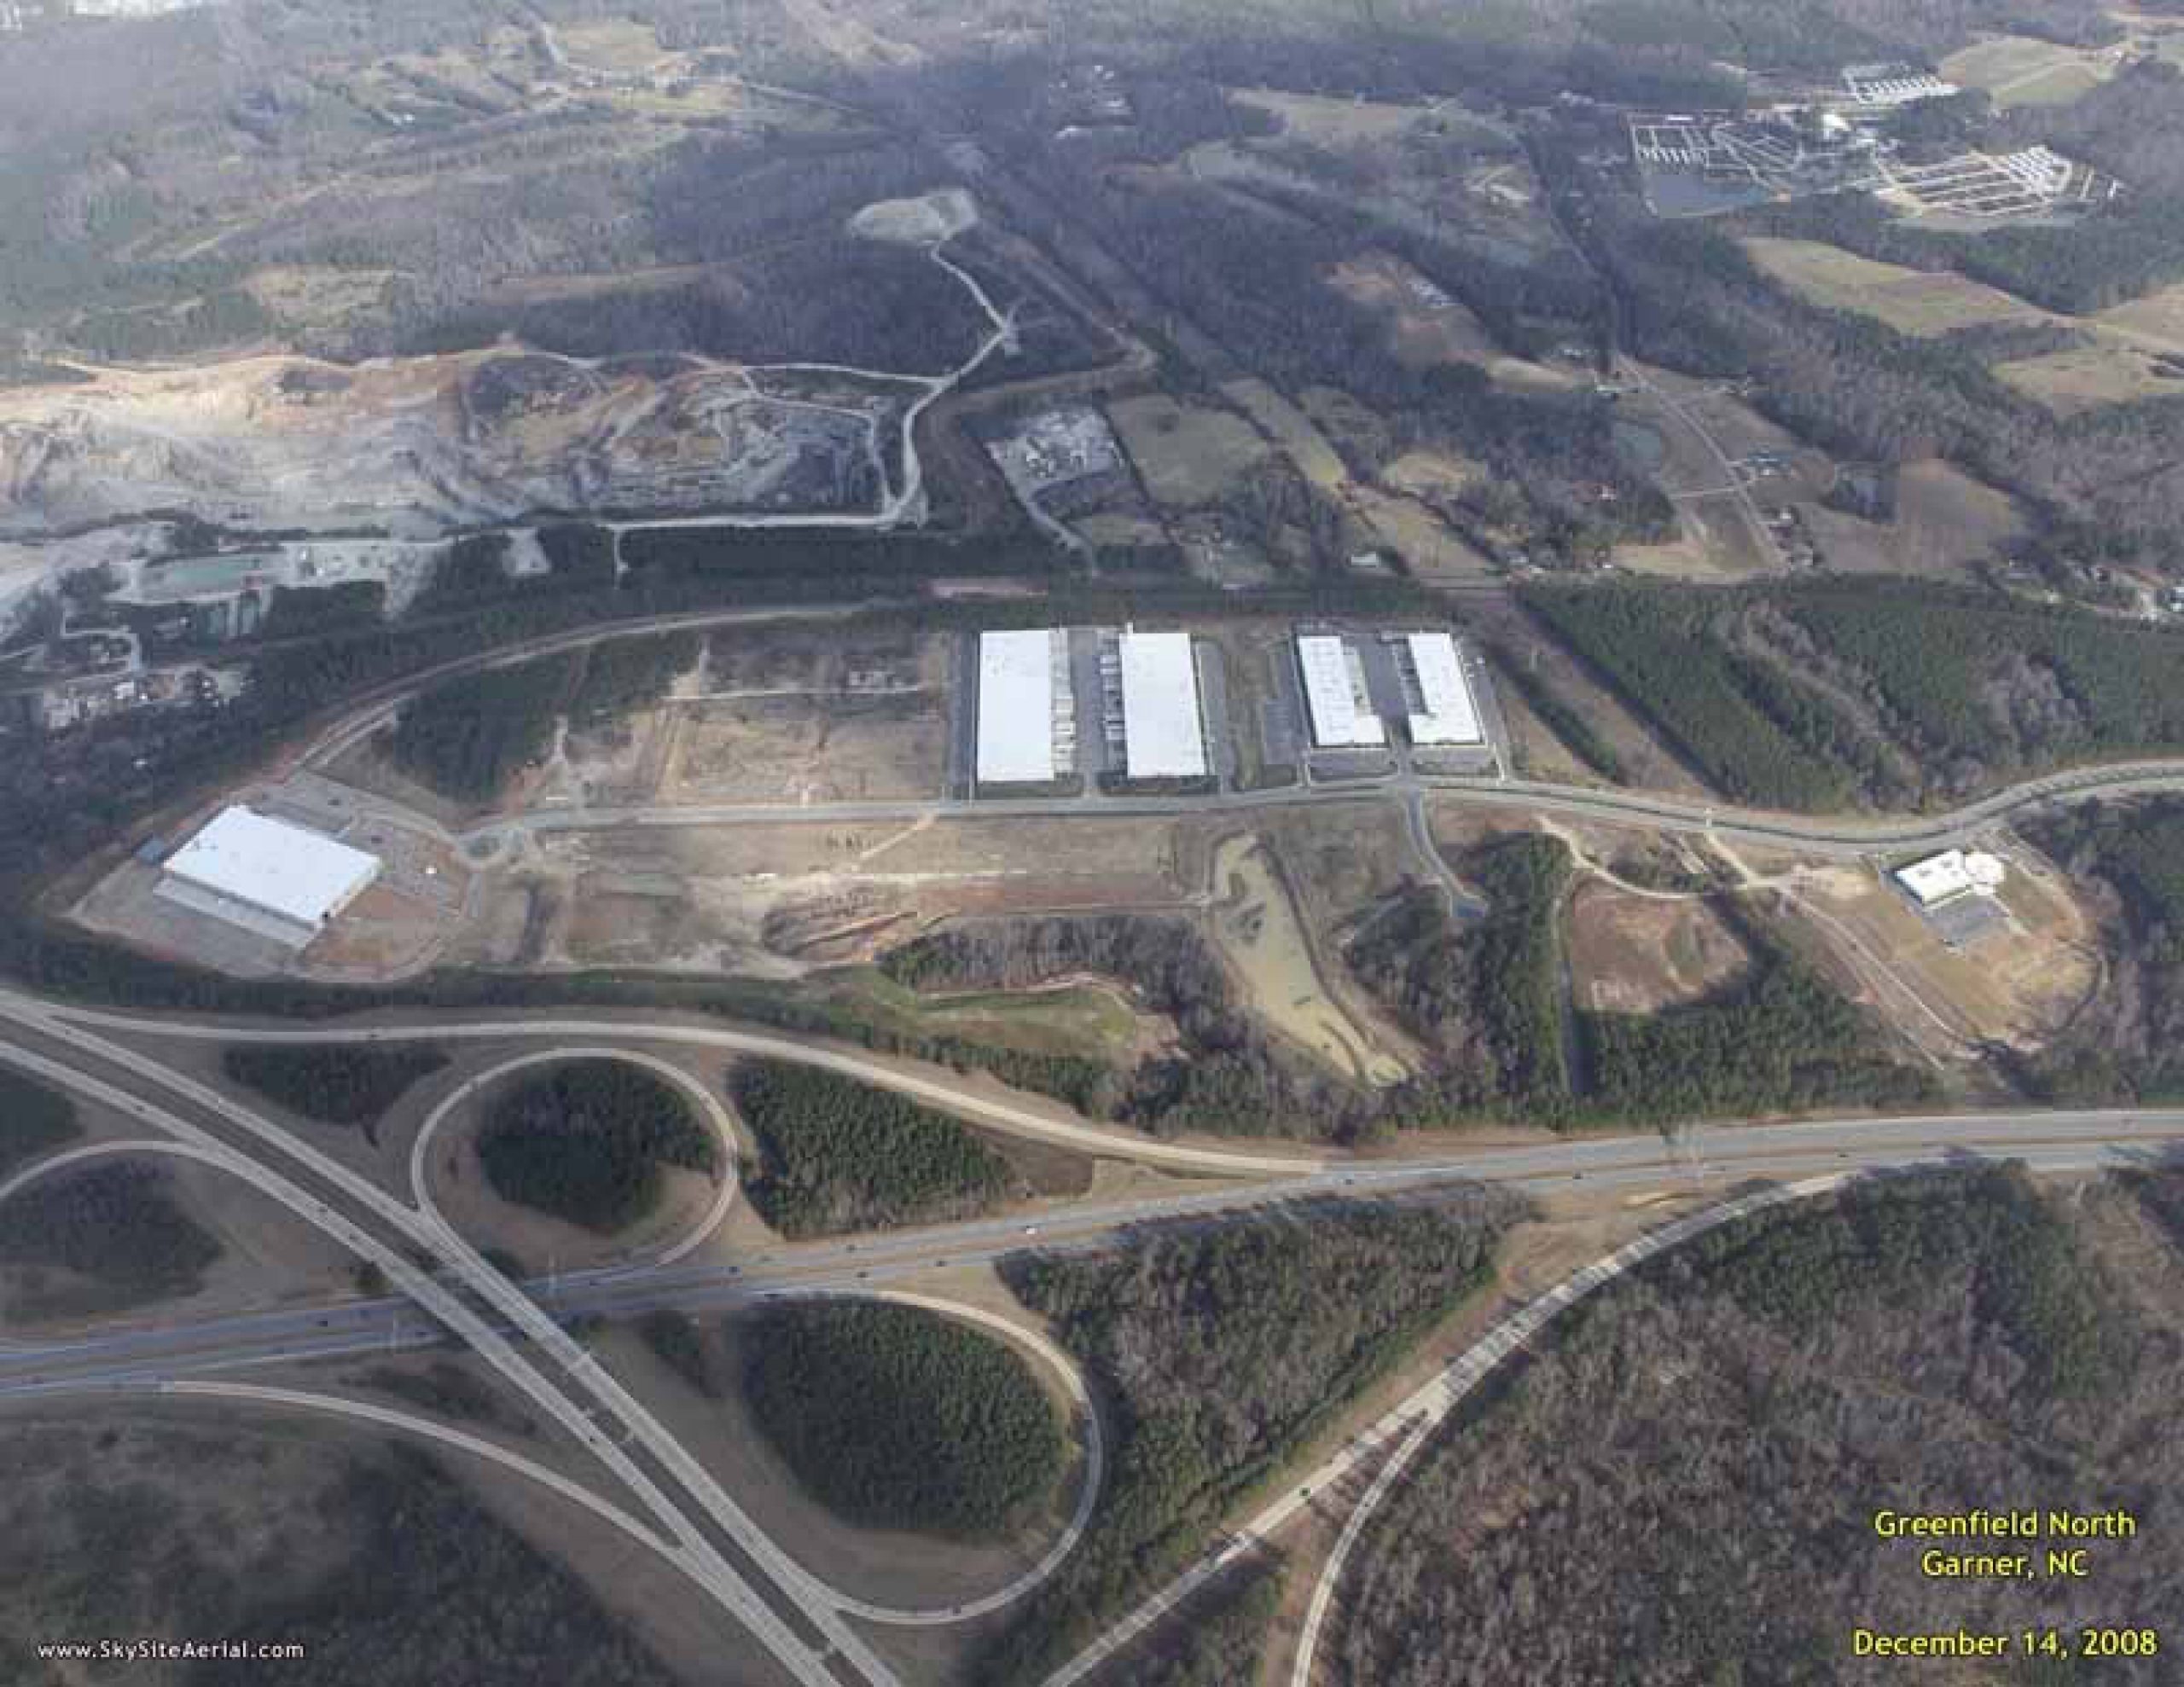 Greenfield North Industrial Park Infrastructure